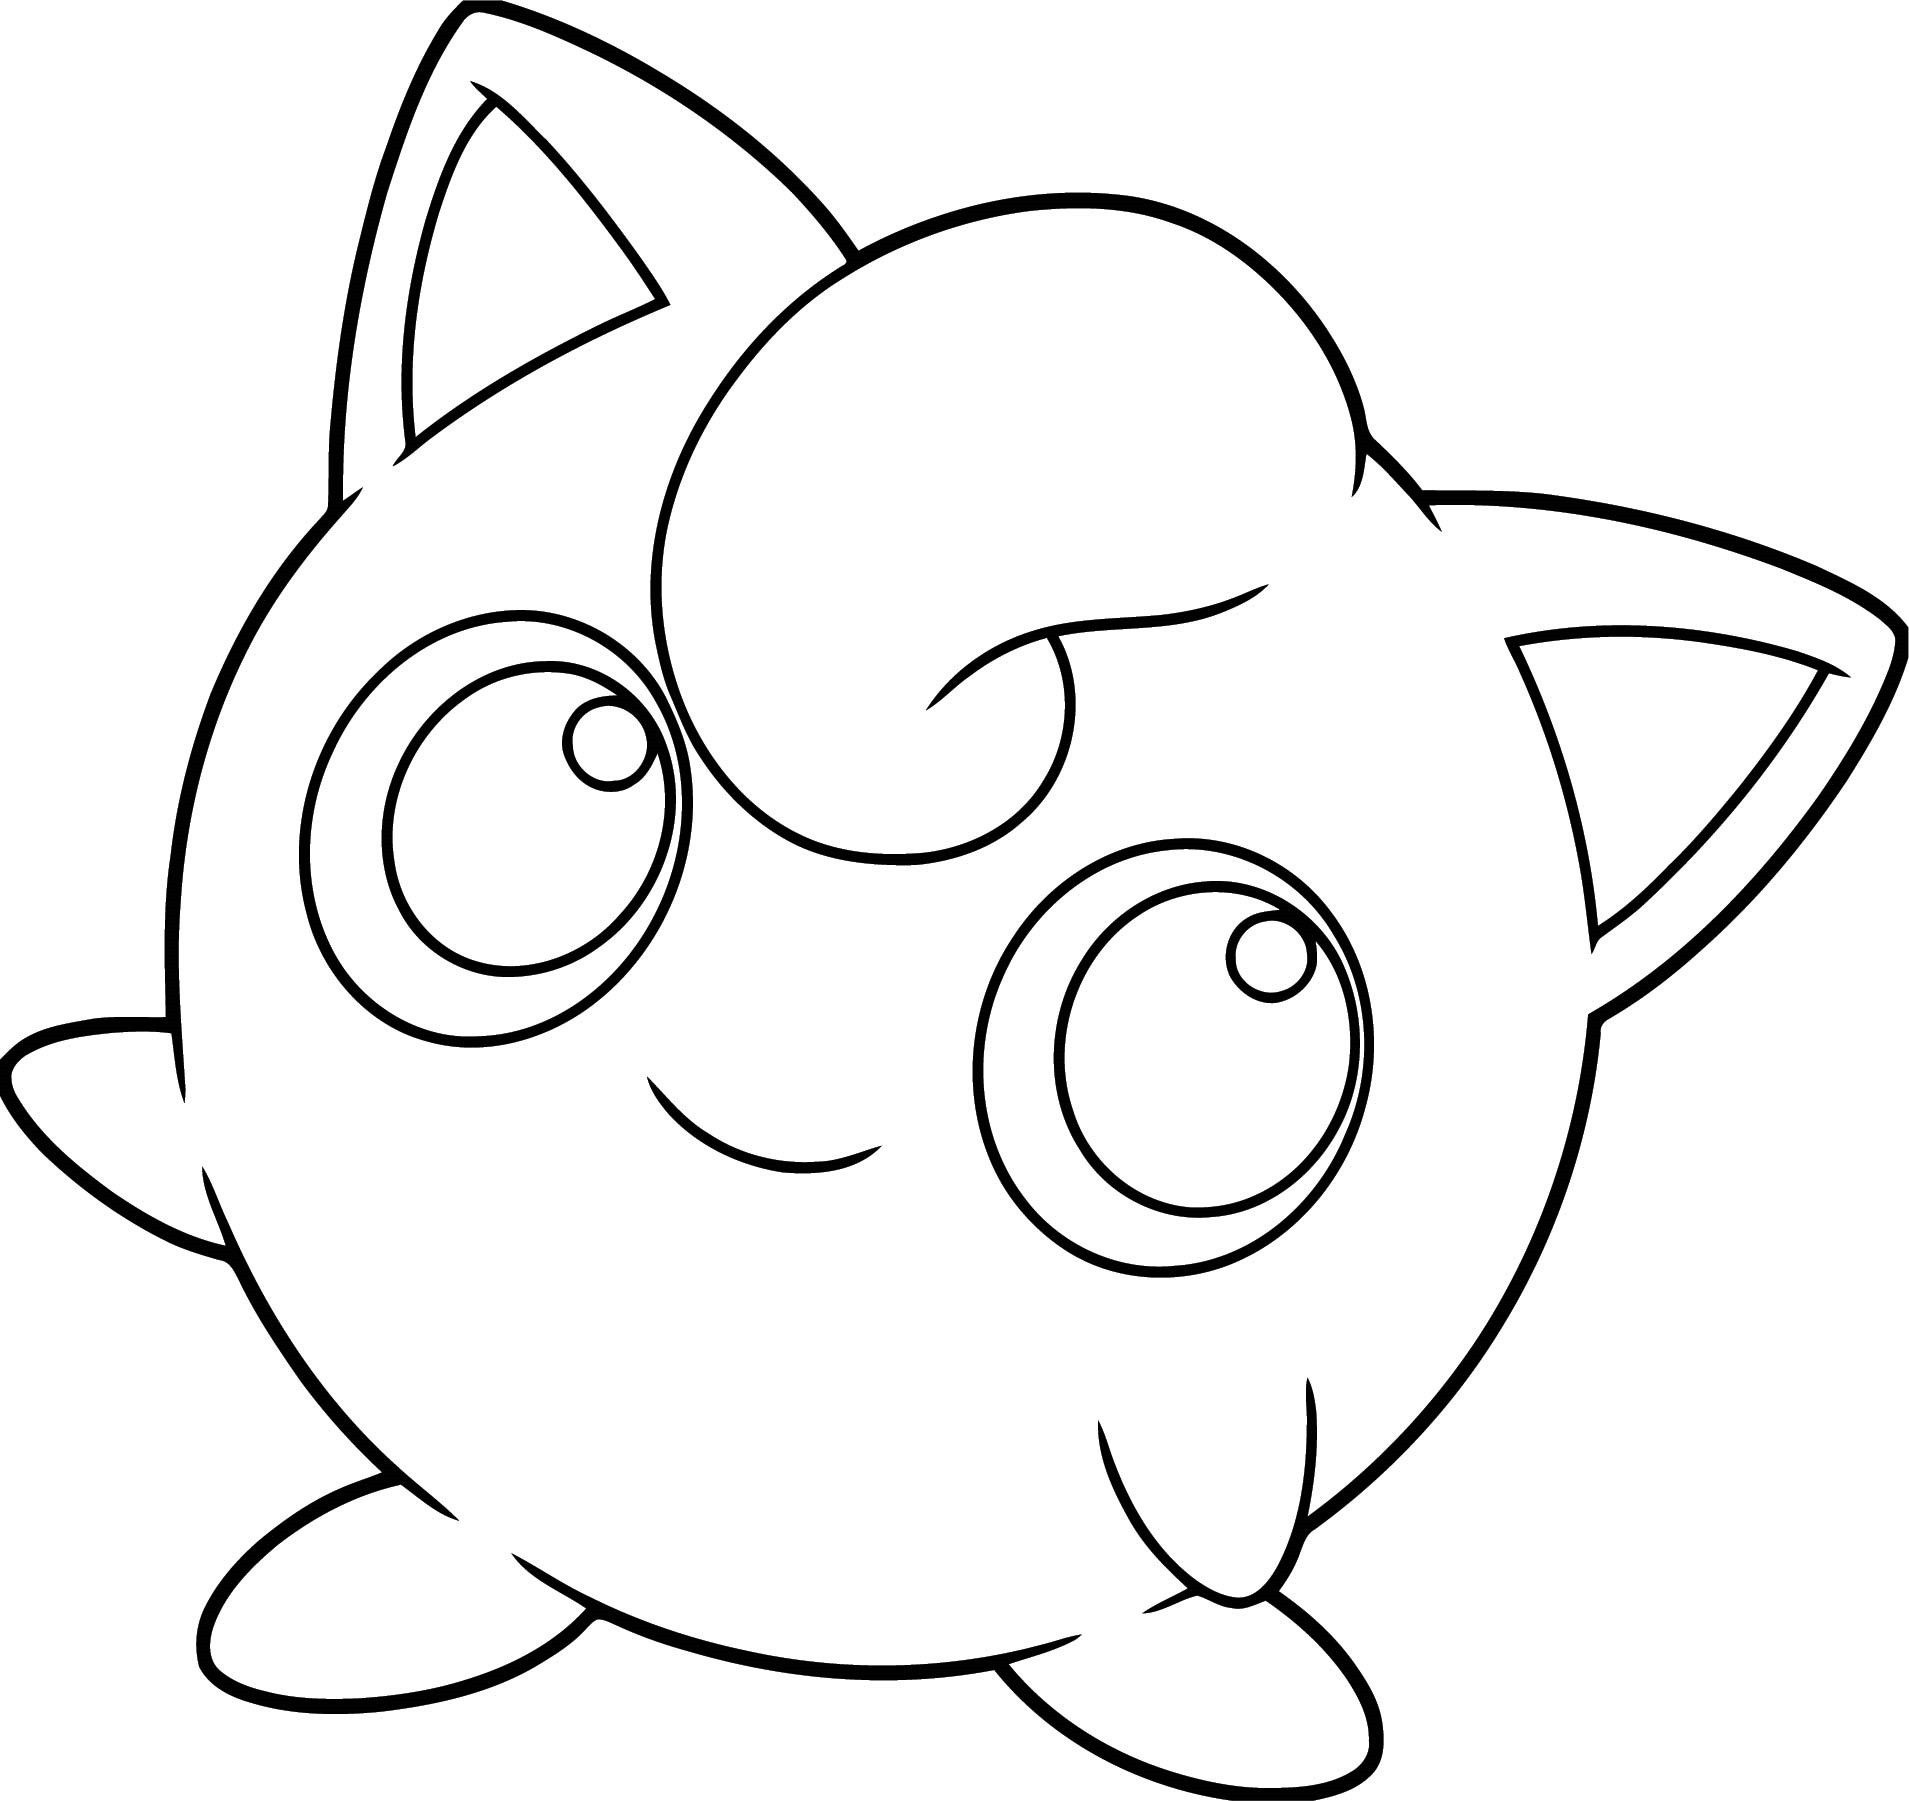 Pokemon go jigglypuff coloring sheets for kids pokemon coloring pages pokemon coloring unicorn coloring pages